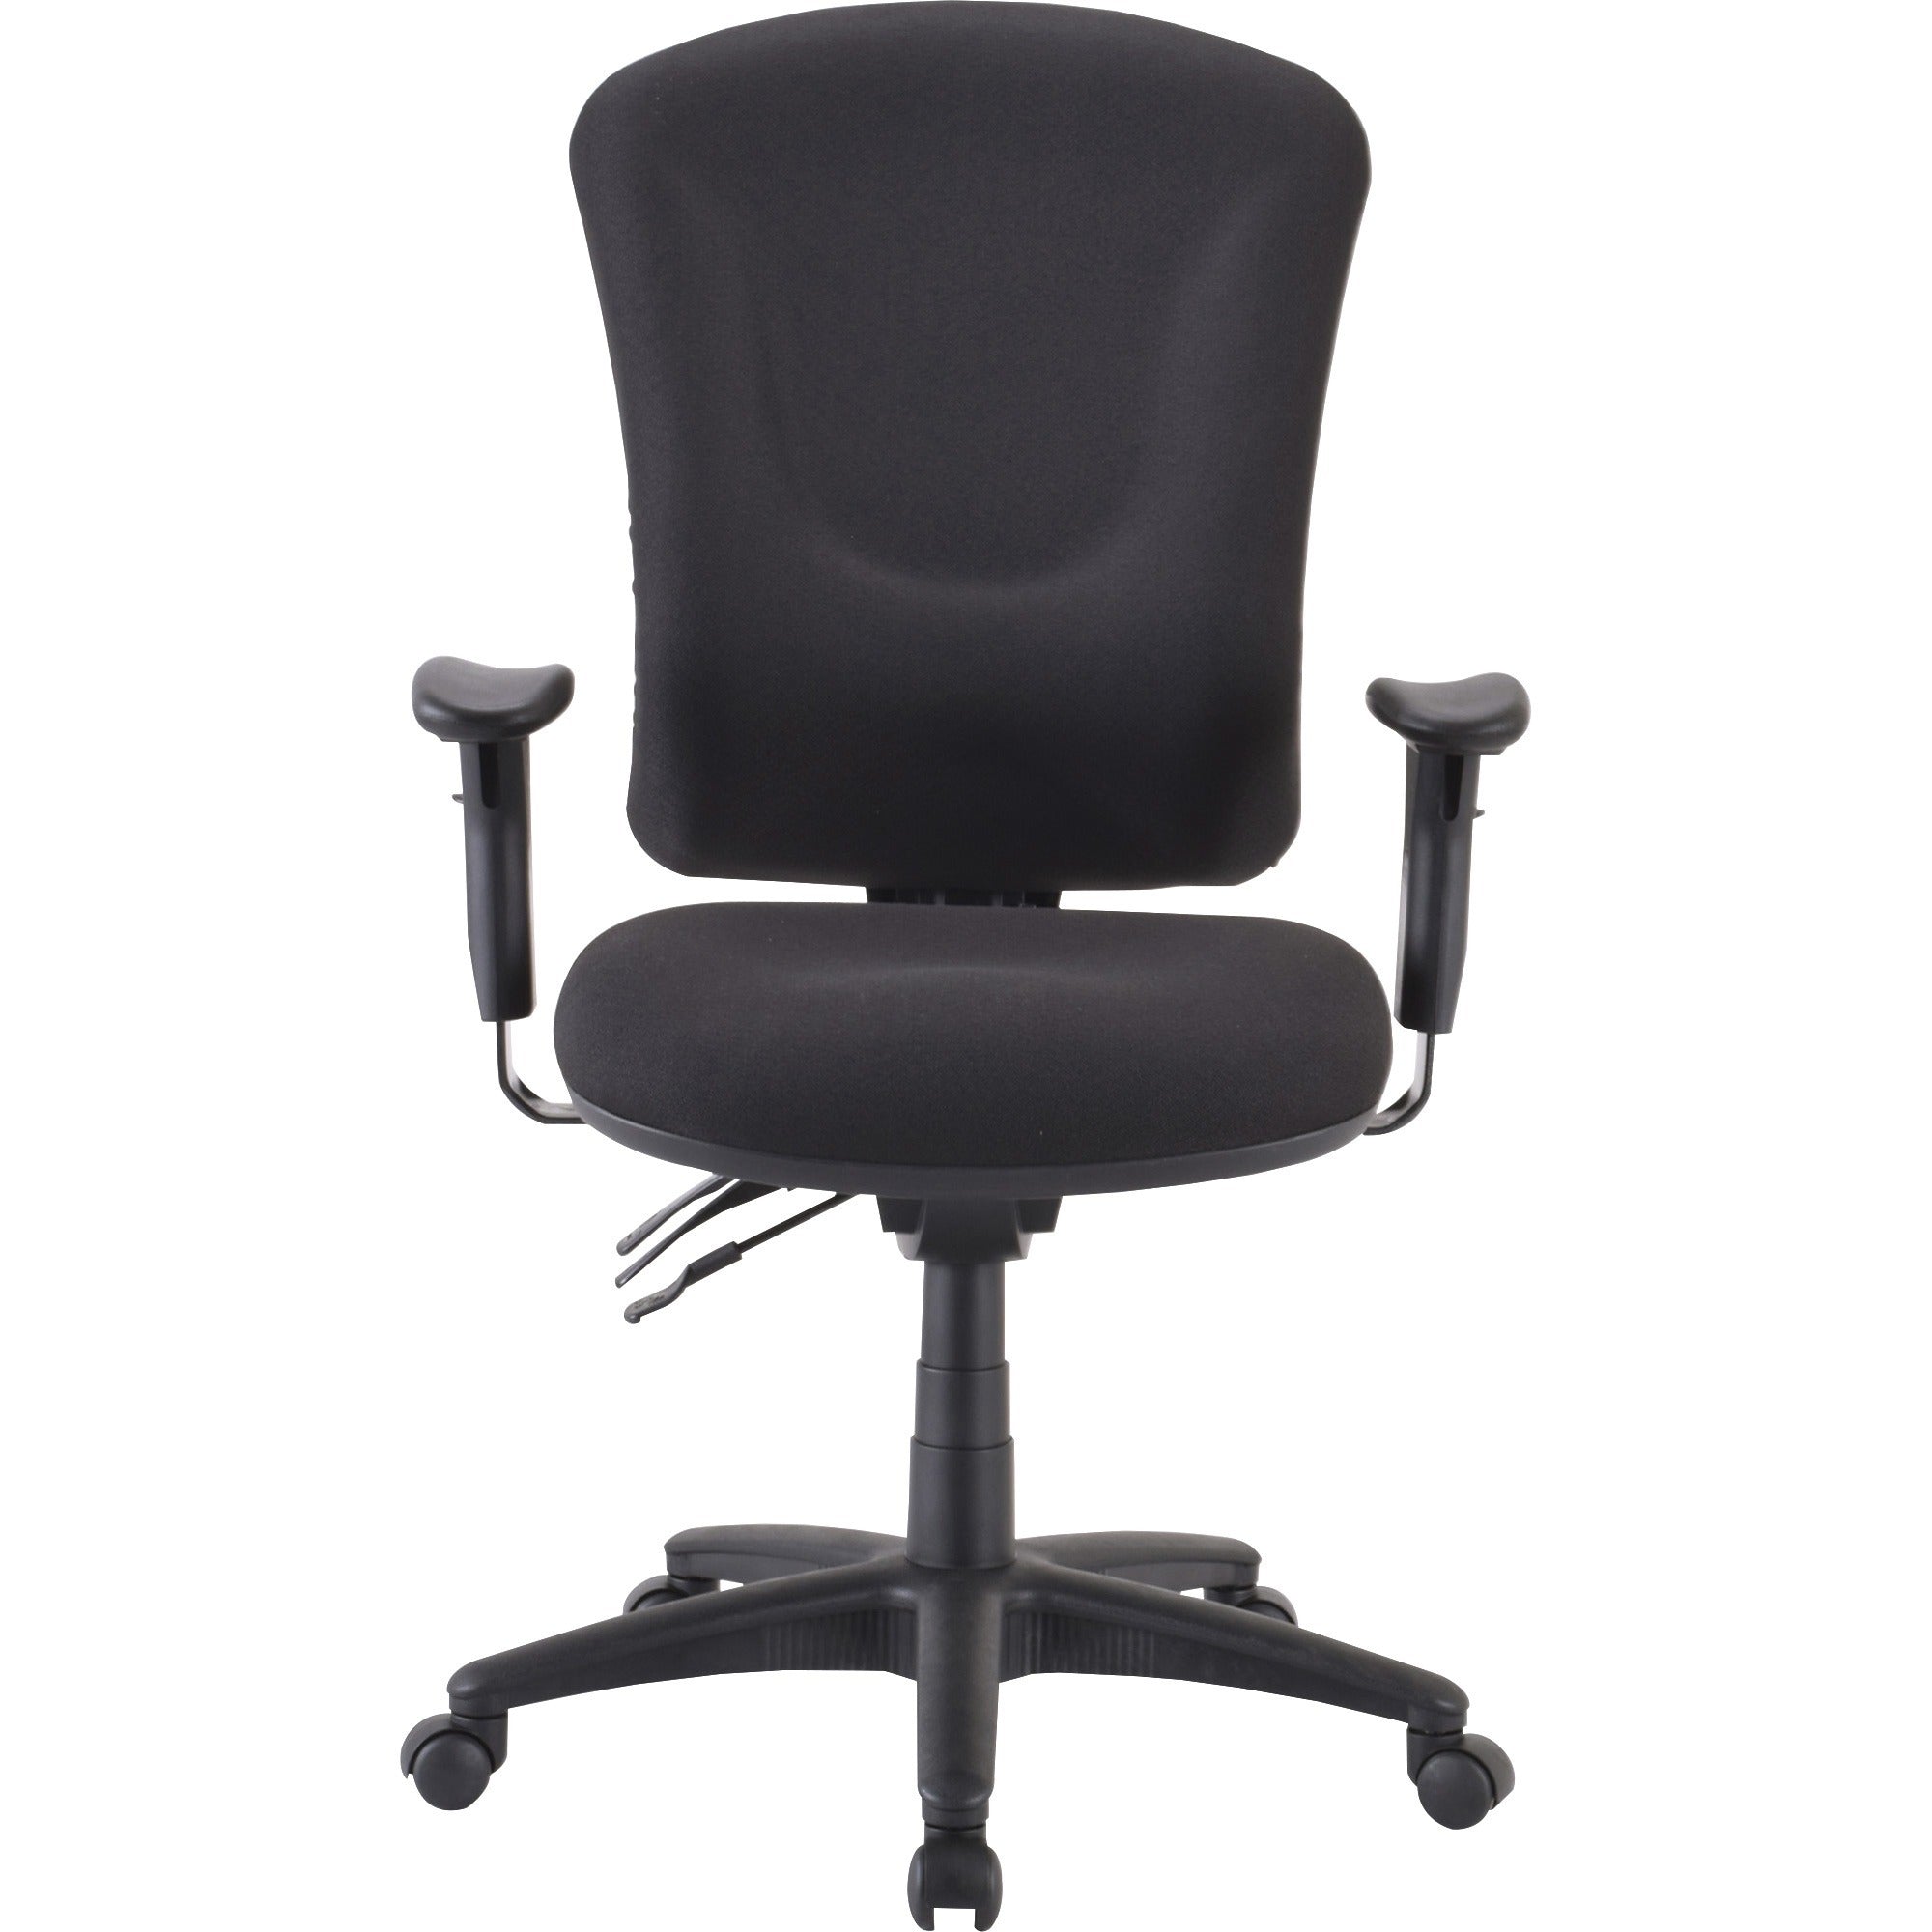 Lorell Contoured Managerial Task Chair - Black Polyester Seat - Black Frame - 1 Each - 